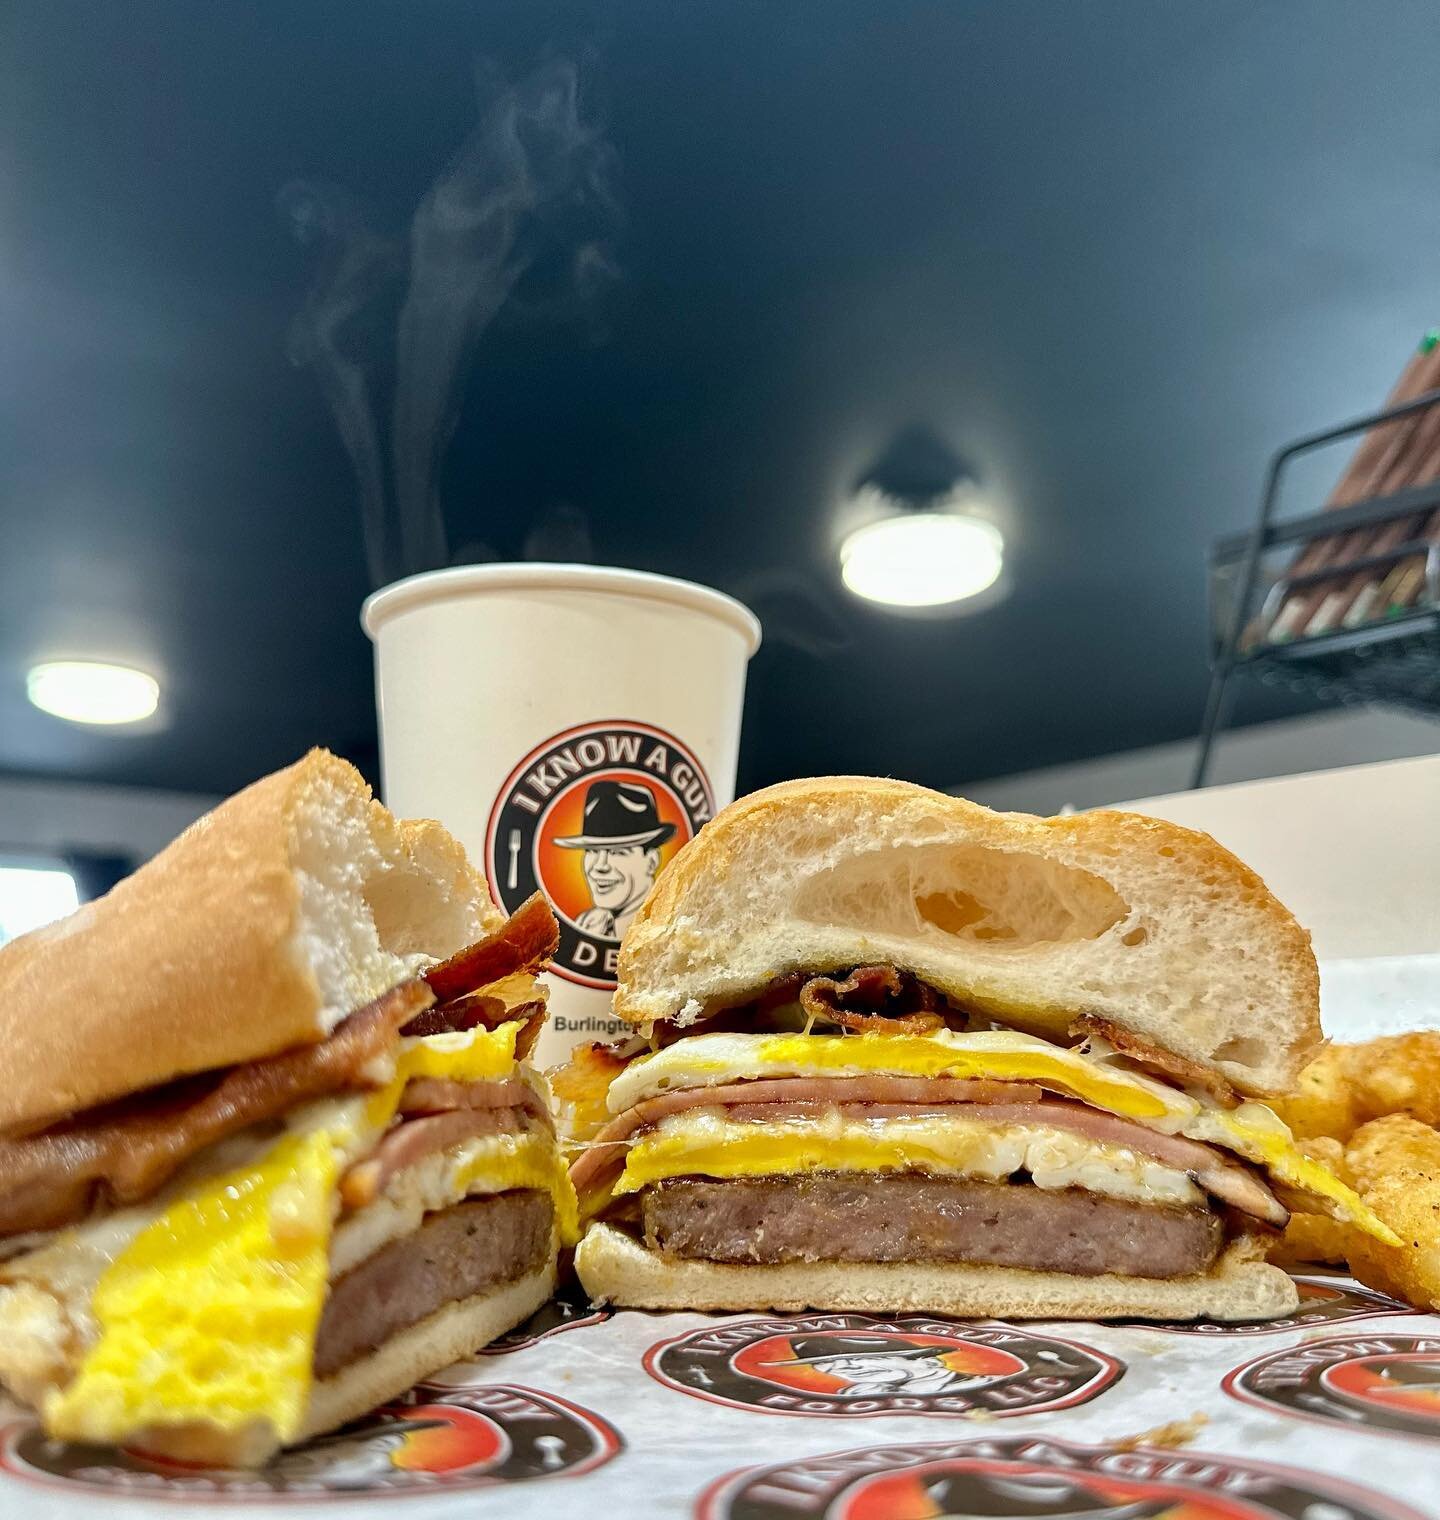 Have we got a deal for you. 

Specials!!!!! While supplies last..

Big Daddy Breakfast Combo -  2 eggs, bacon, ham, sausage, with coffee, and hash browns $10

Chief Mike&rsquo;s Munchies - 2 fried green tomatoes, bacon, chedder, spicy mustard $6.50

